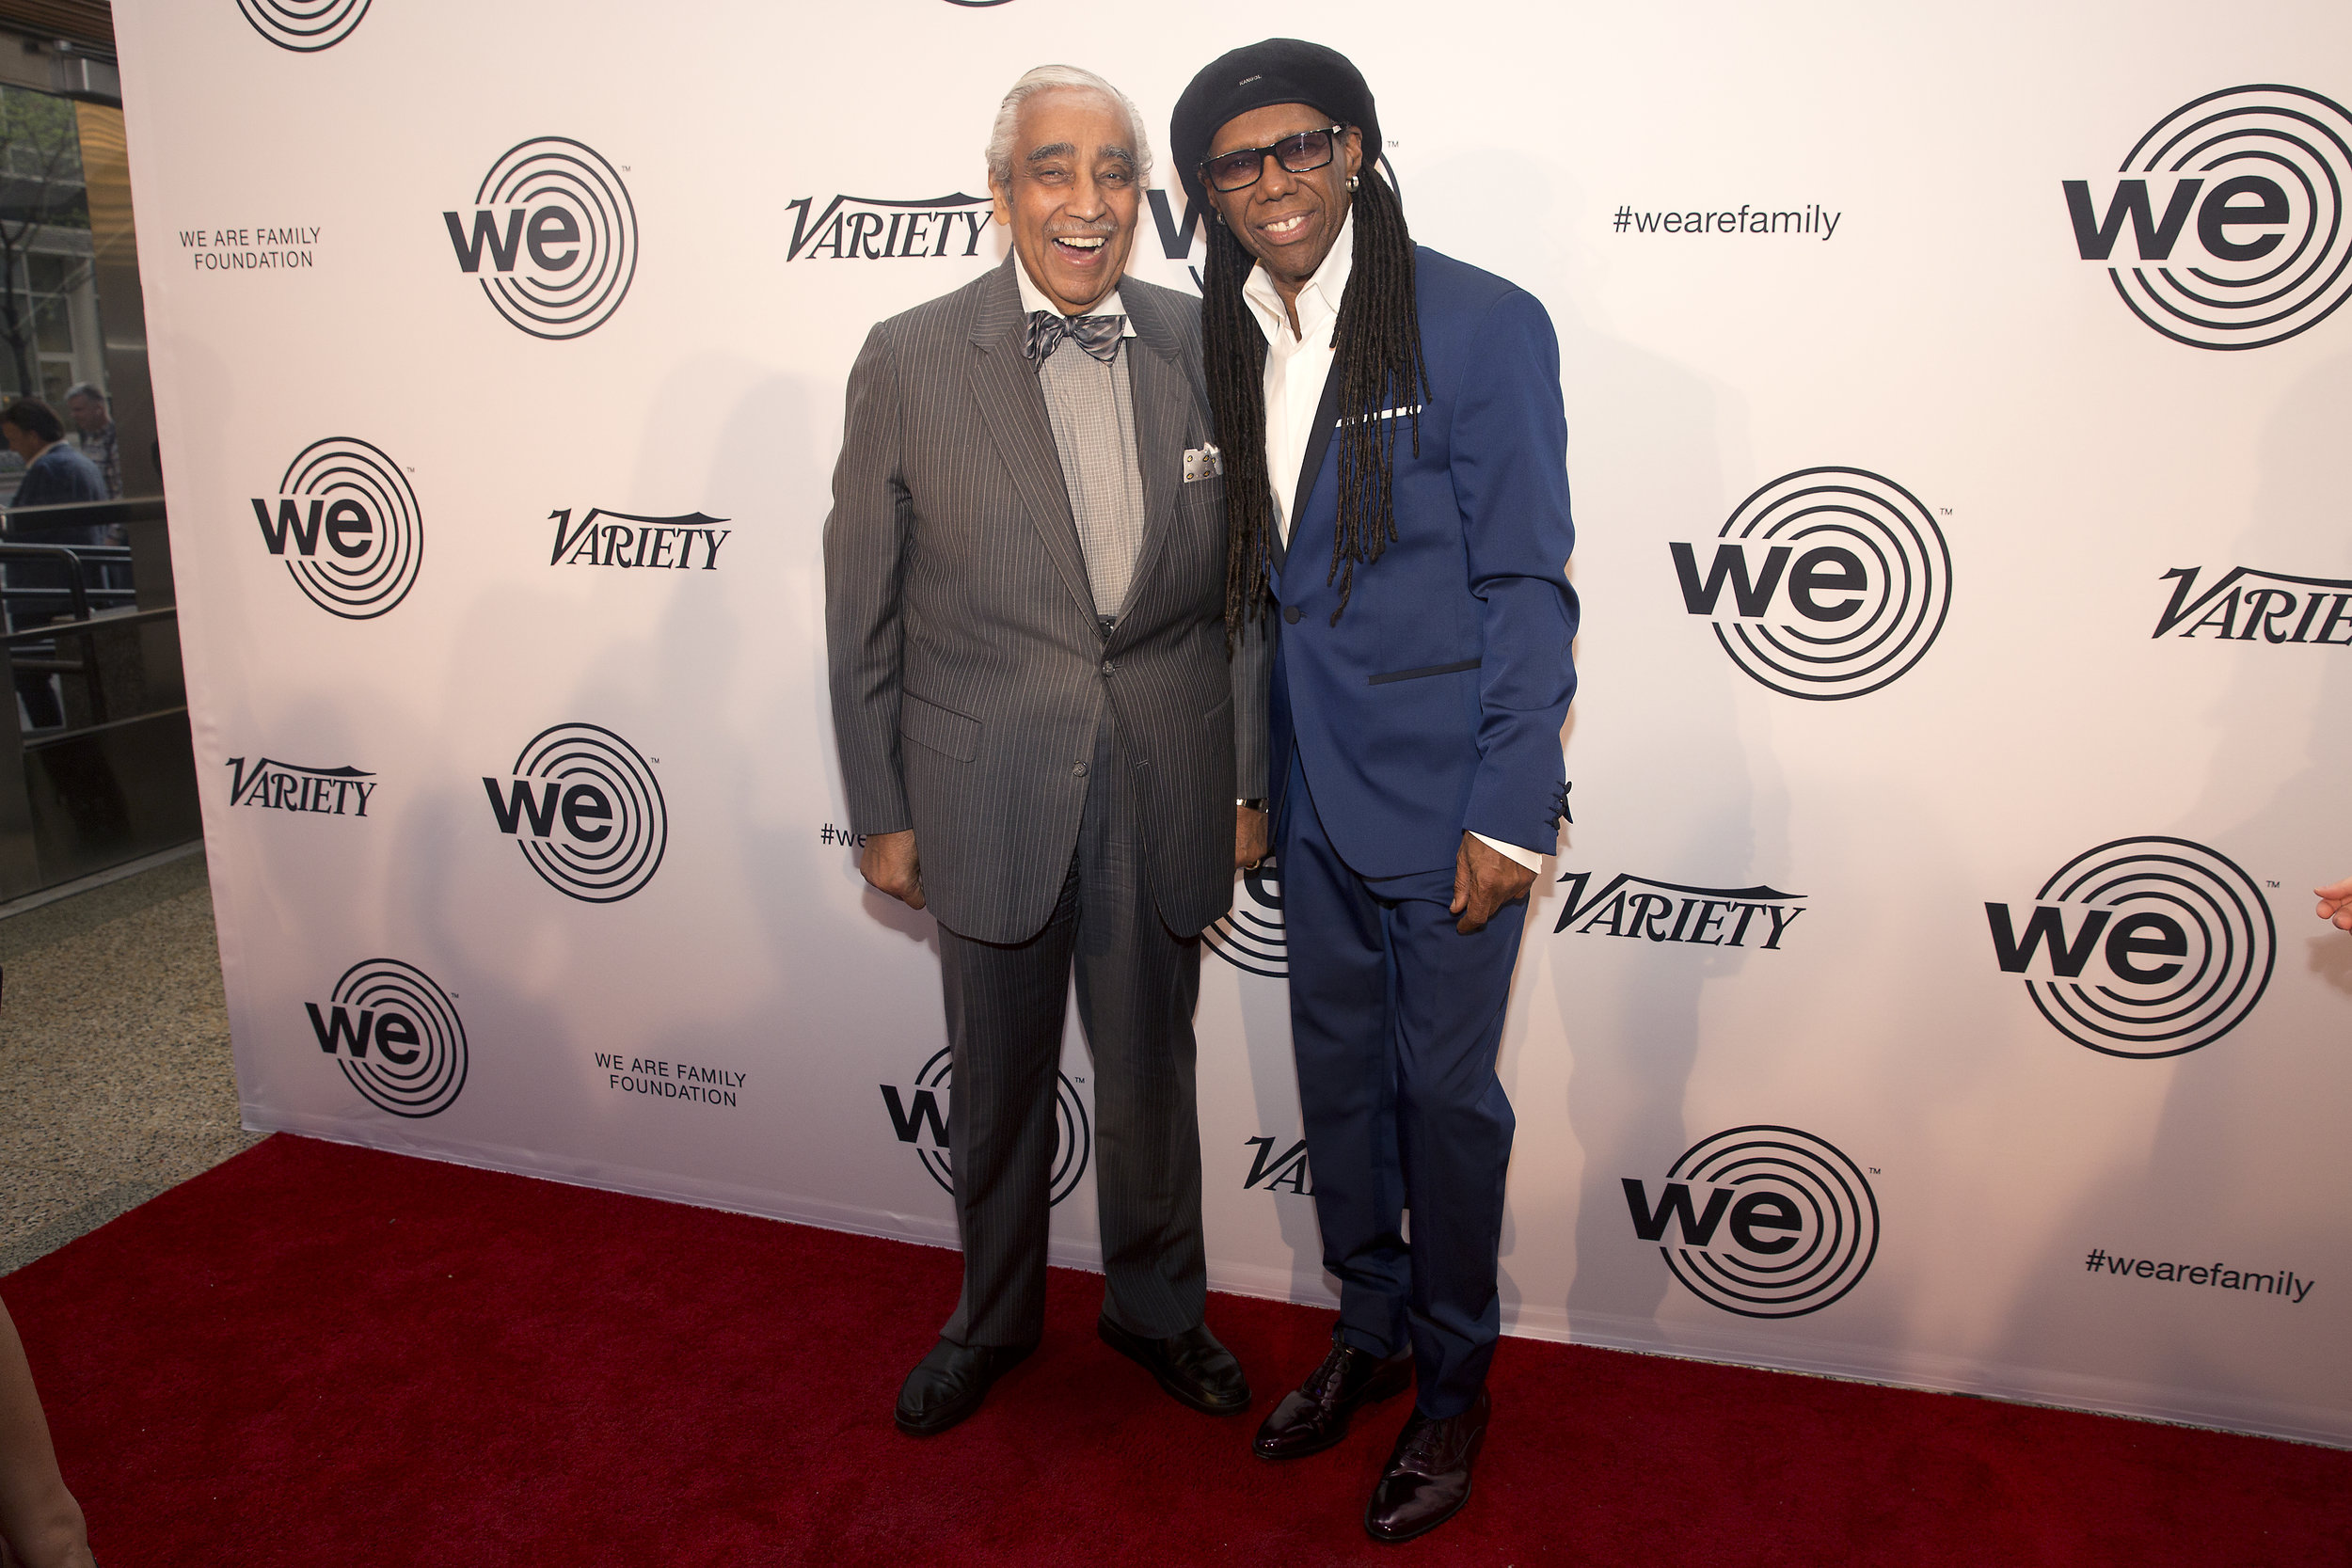 Charles Rangel and Nile Rodgers